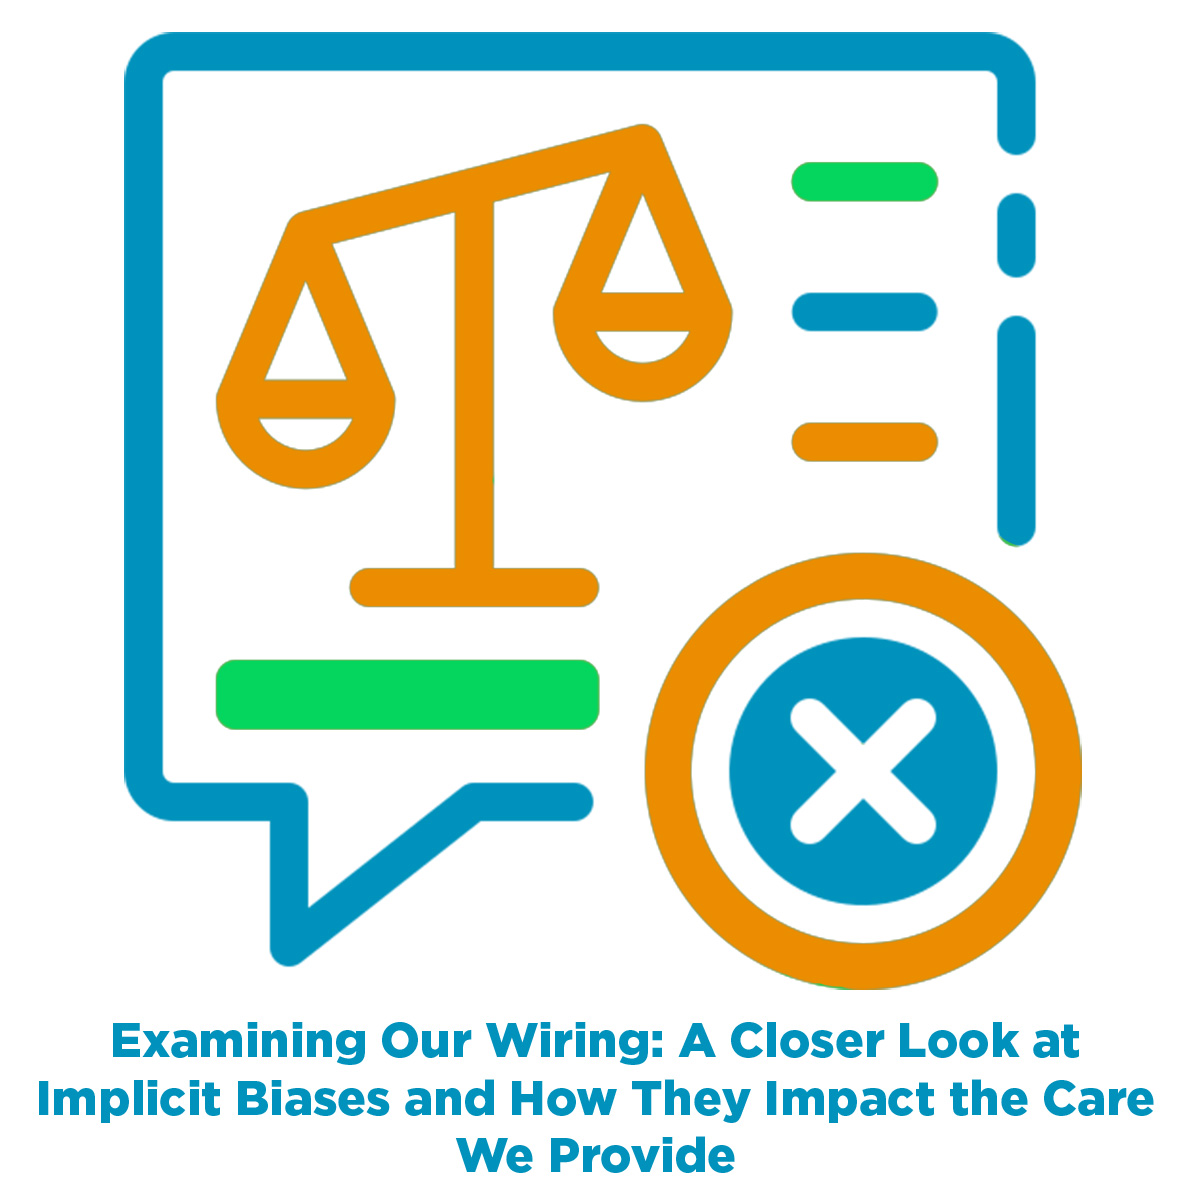 Examining Our Wiring: A Closer Look at Implicit Biases and How They Impact the Care We Provide